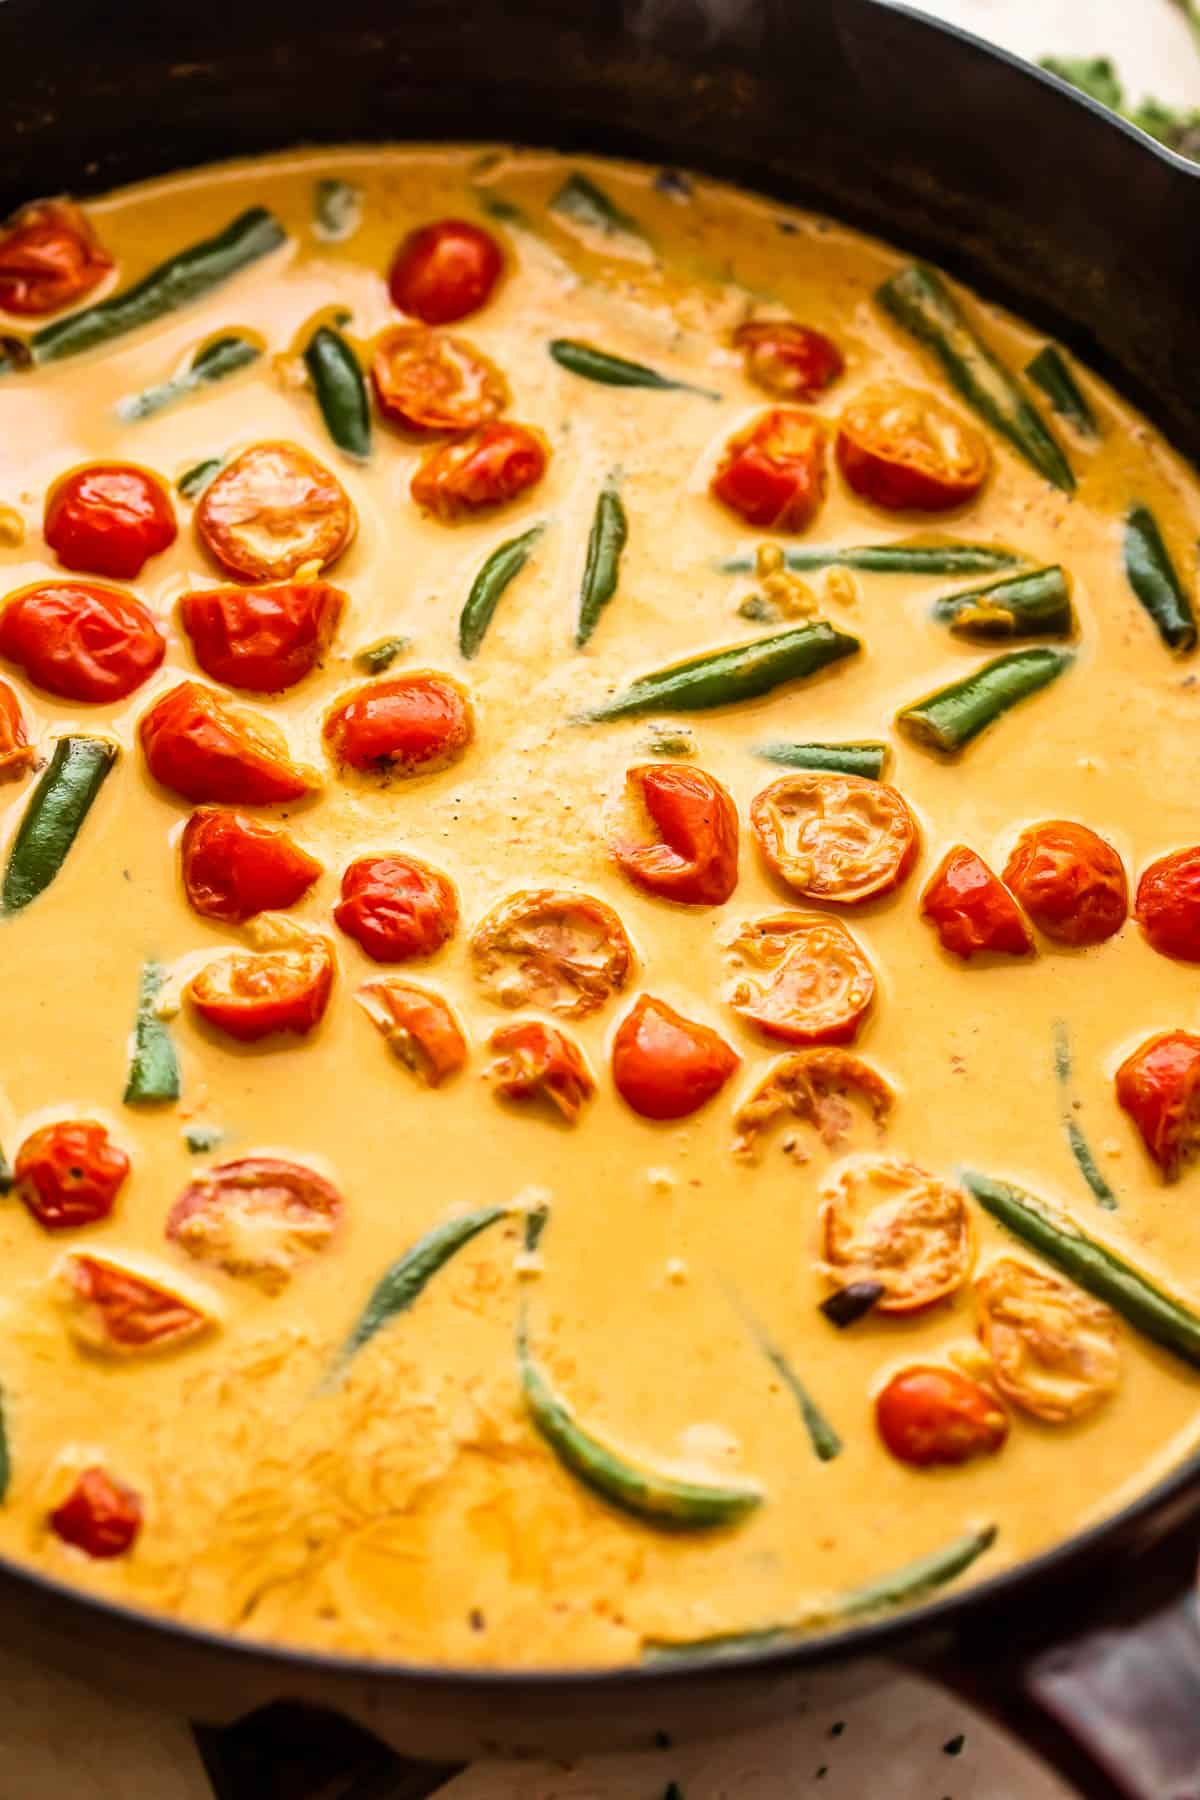 skillet with tomatoes and green beans mixed creamy sauce